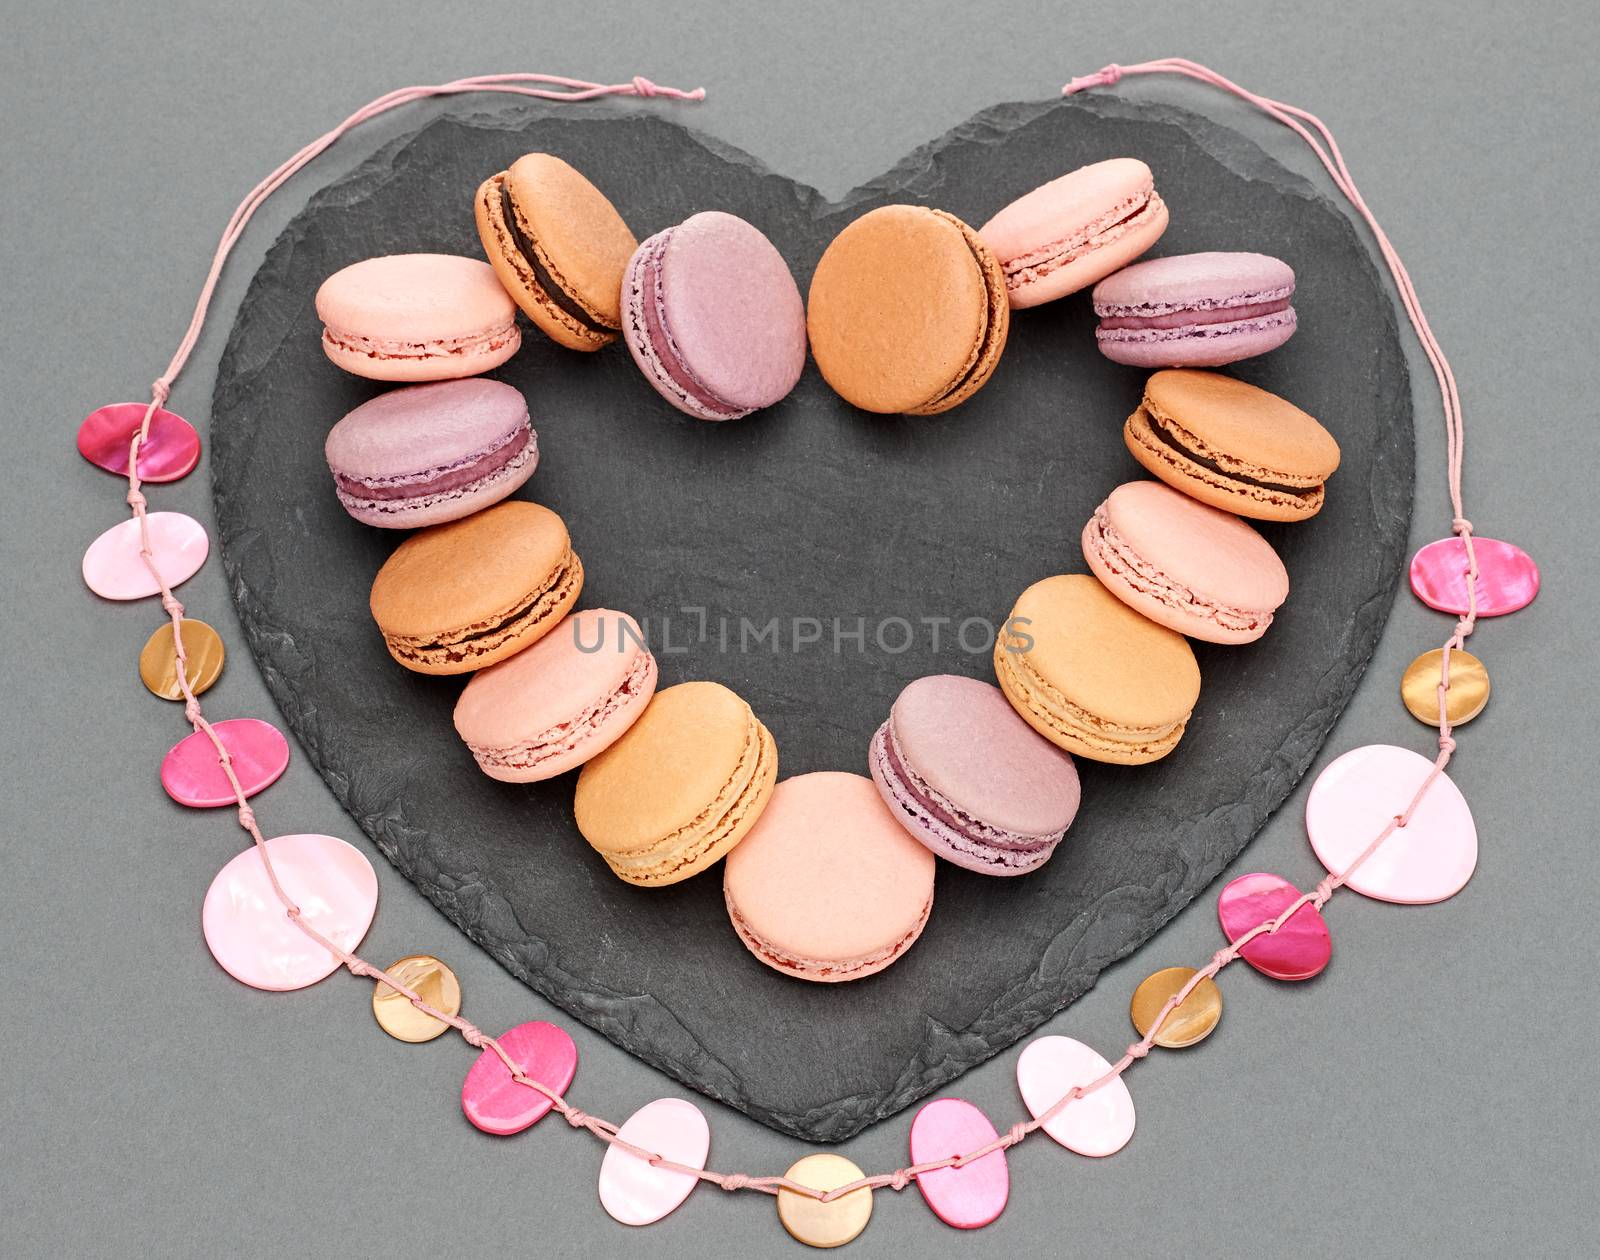 Still life, macarons sweet colorful, heart shape, black placemat. French traditional delicious dessert with necklace. Unusual creative romantic, gray background. Concept for love story.Valentines Day